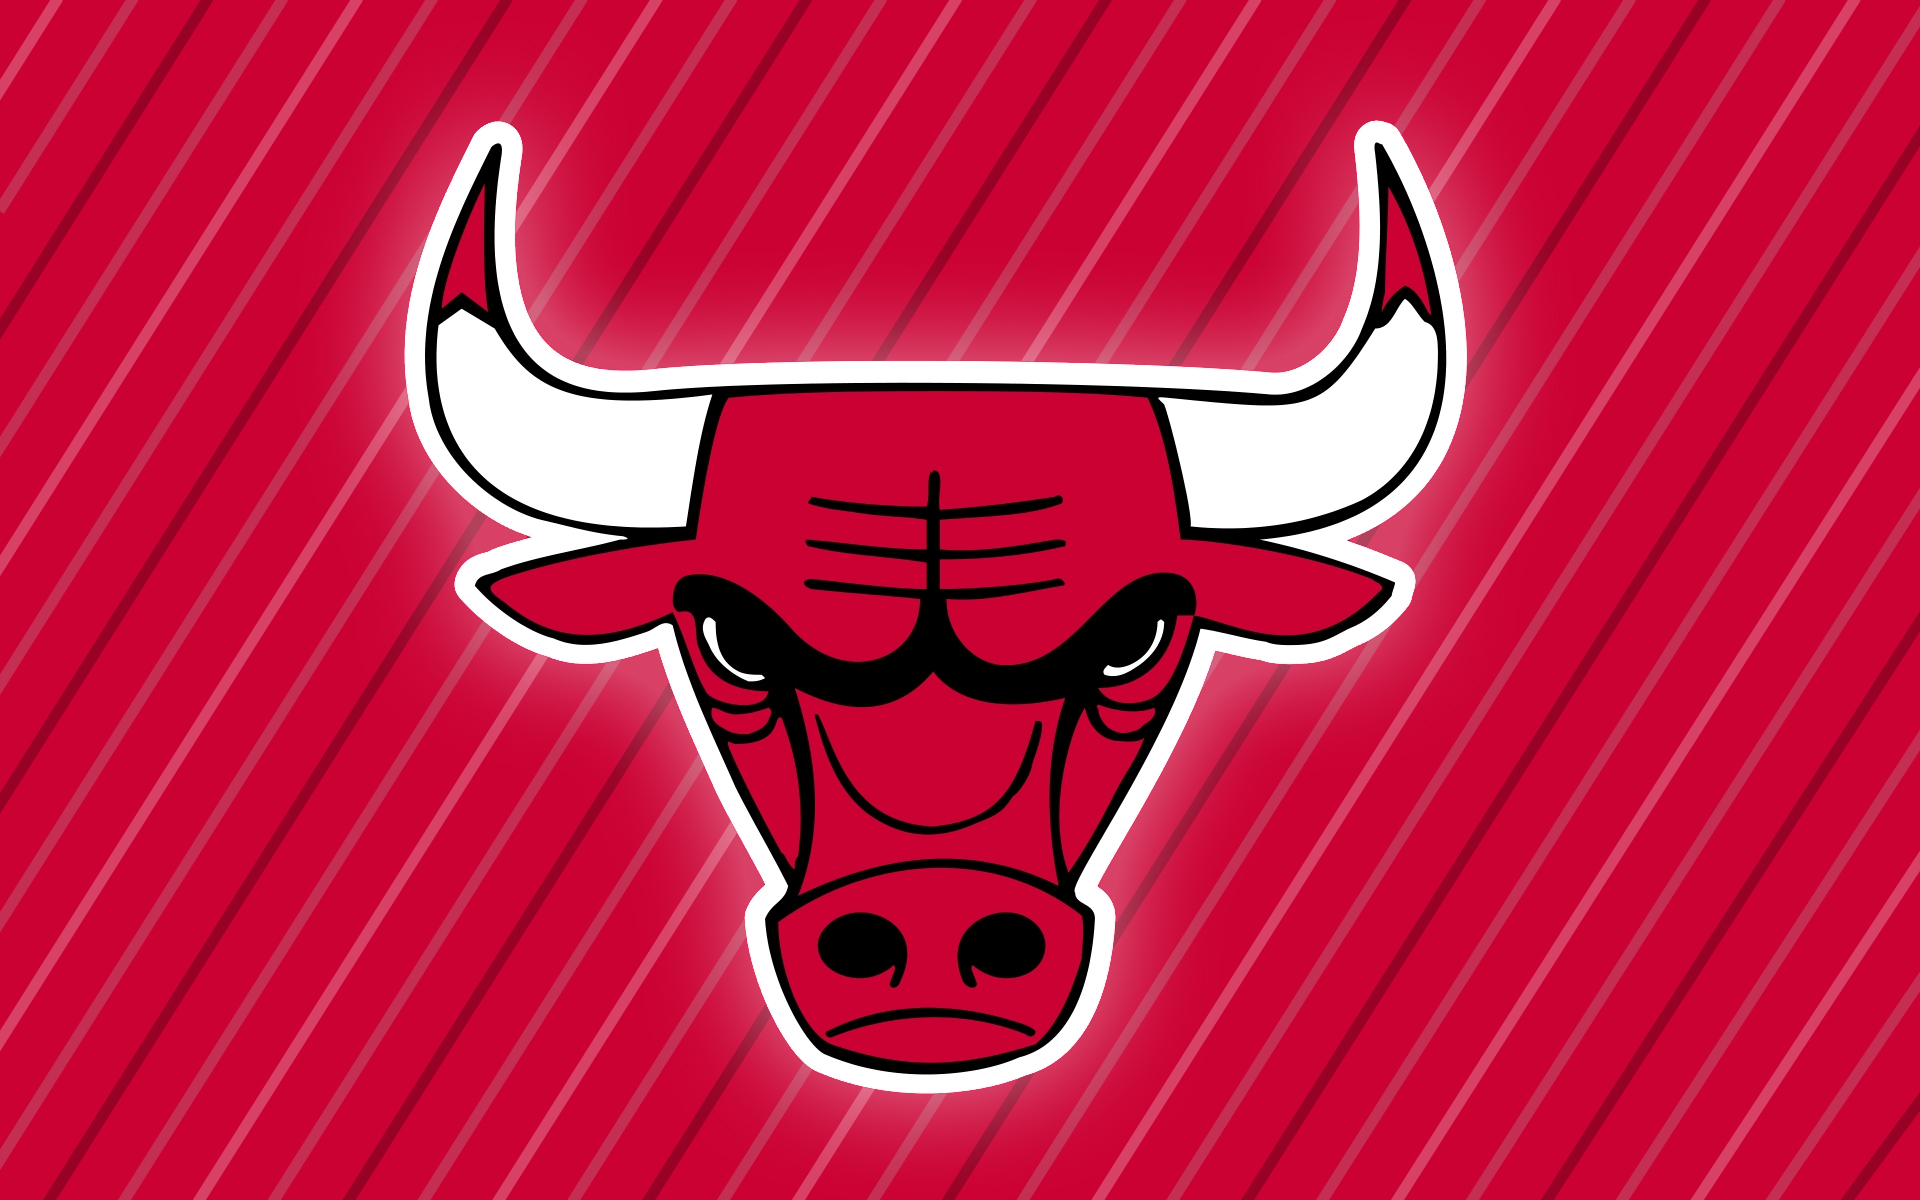 Chicago Bulls HD background Chicago Bulls wallpapers